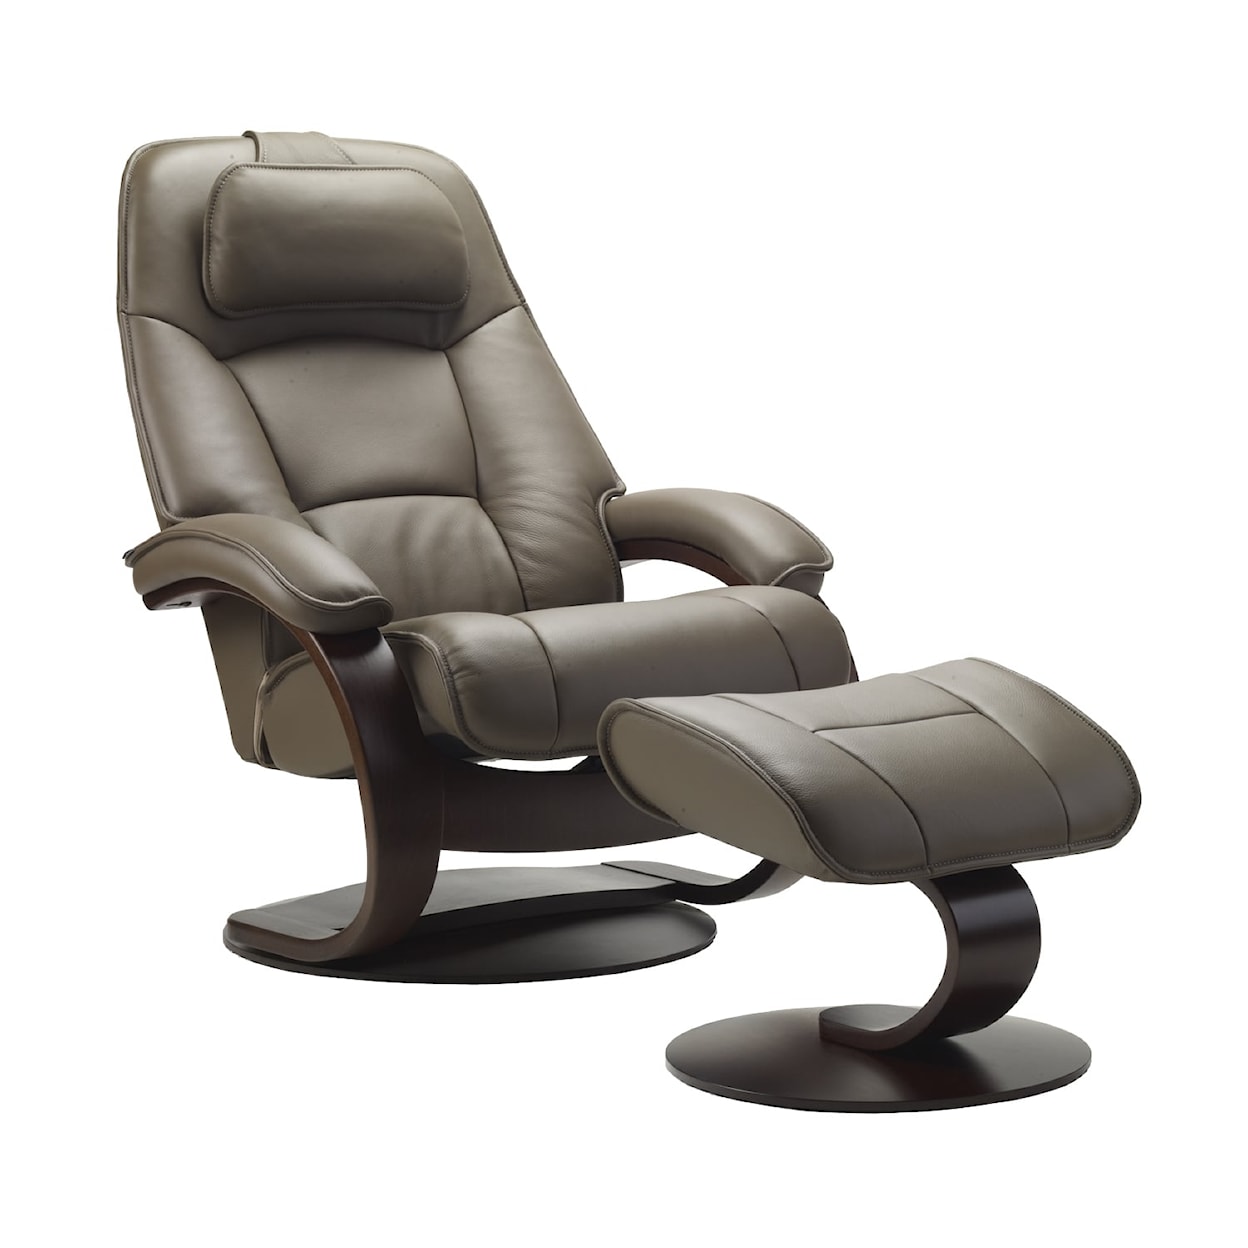 Fjords by Hjellegjerde Classic Comfort Collection Admiral C Small Manual Recliner